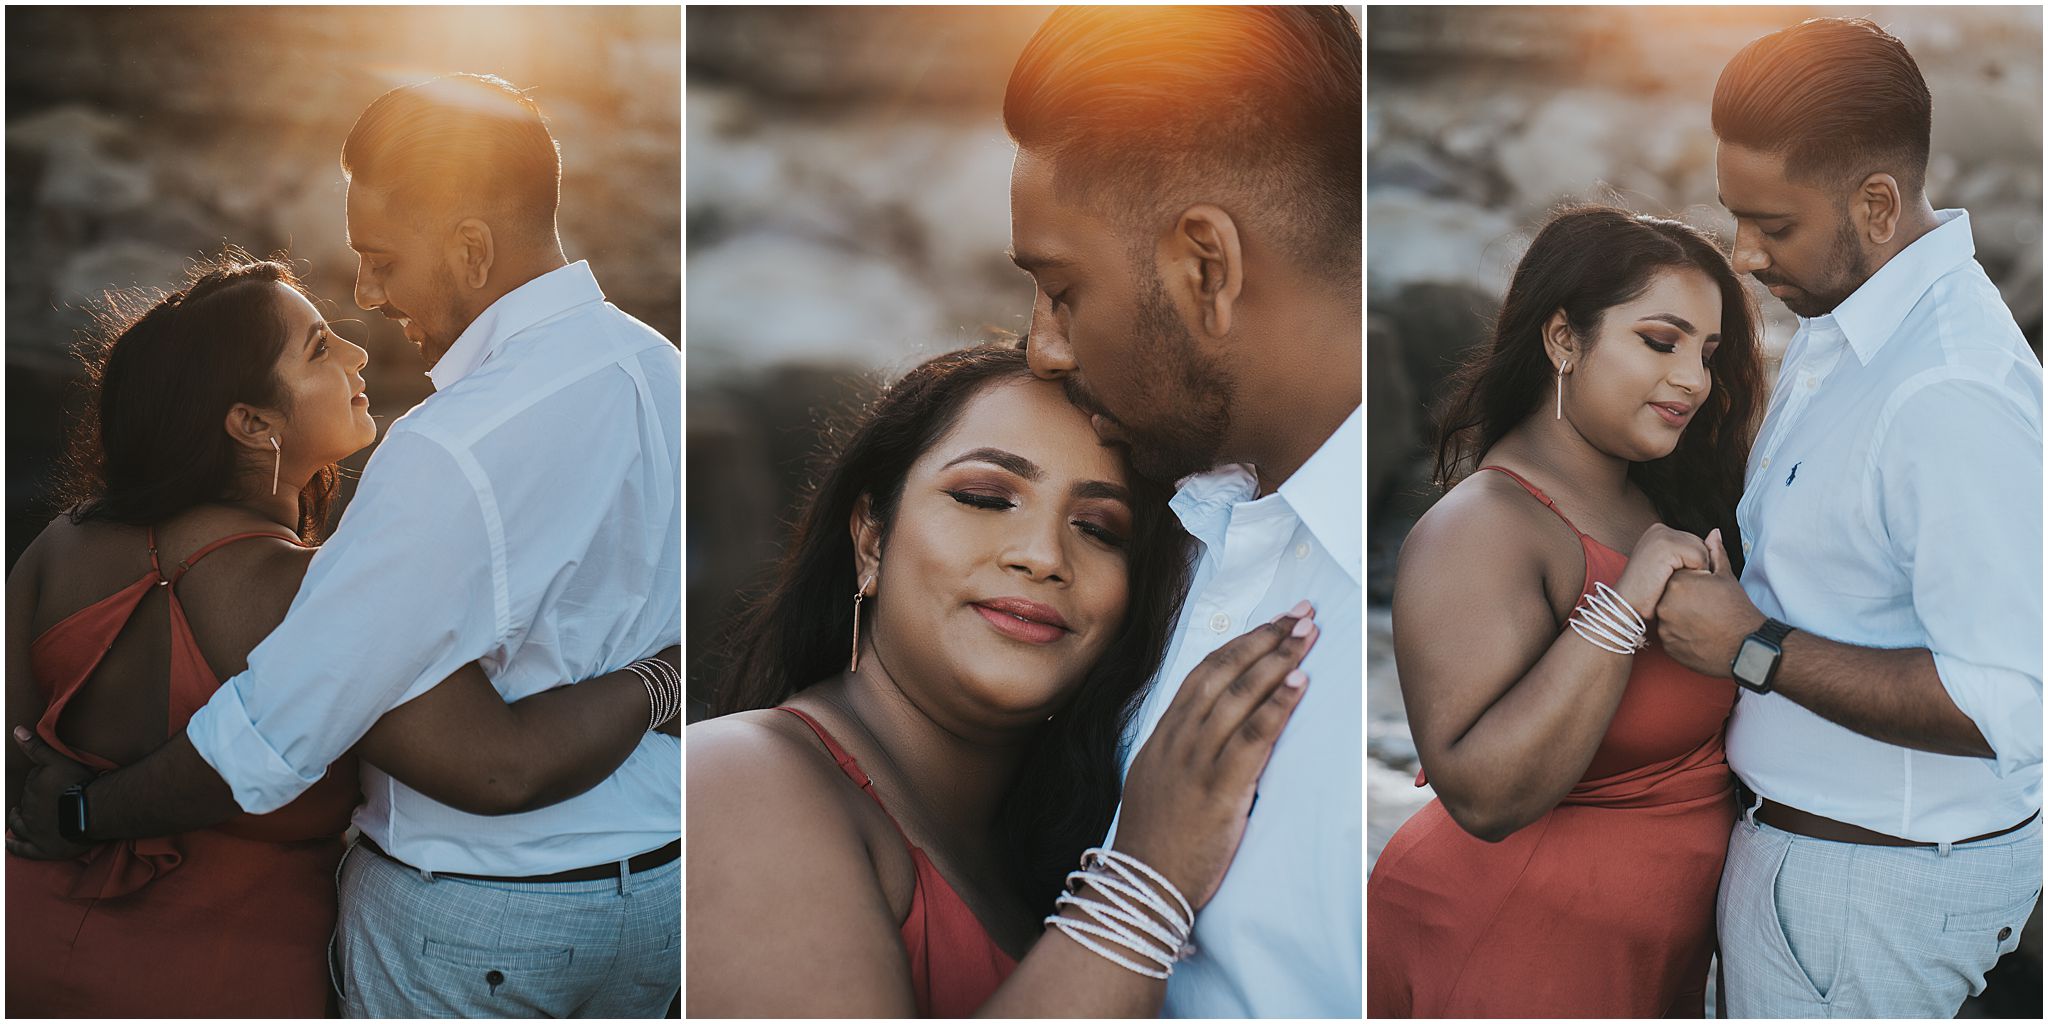 engagement photography waterfalls central coast